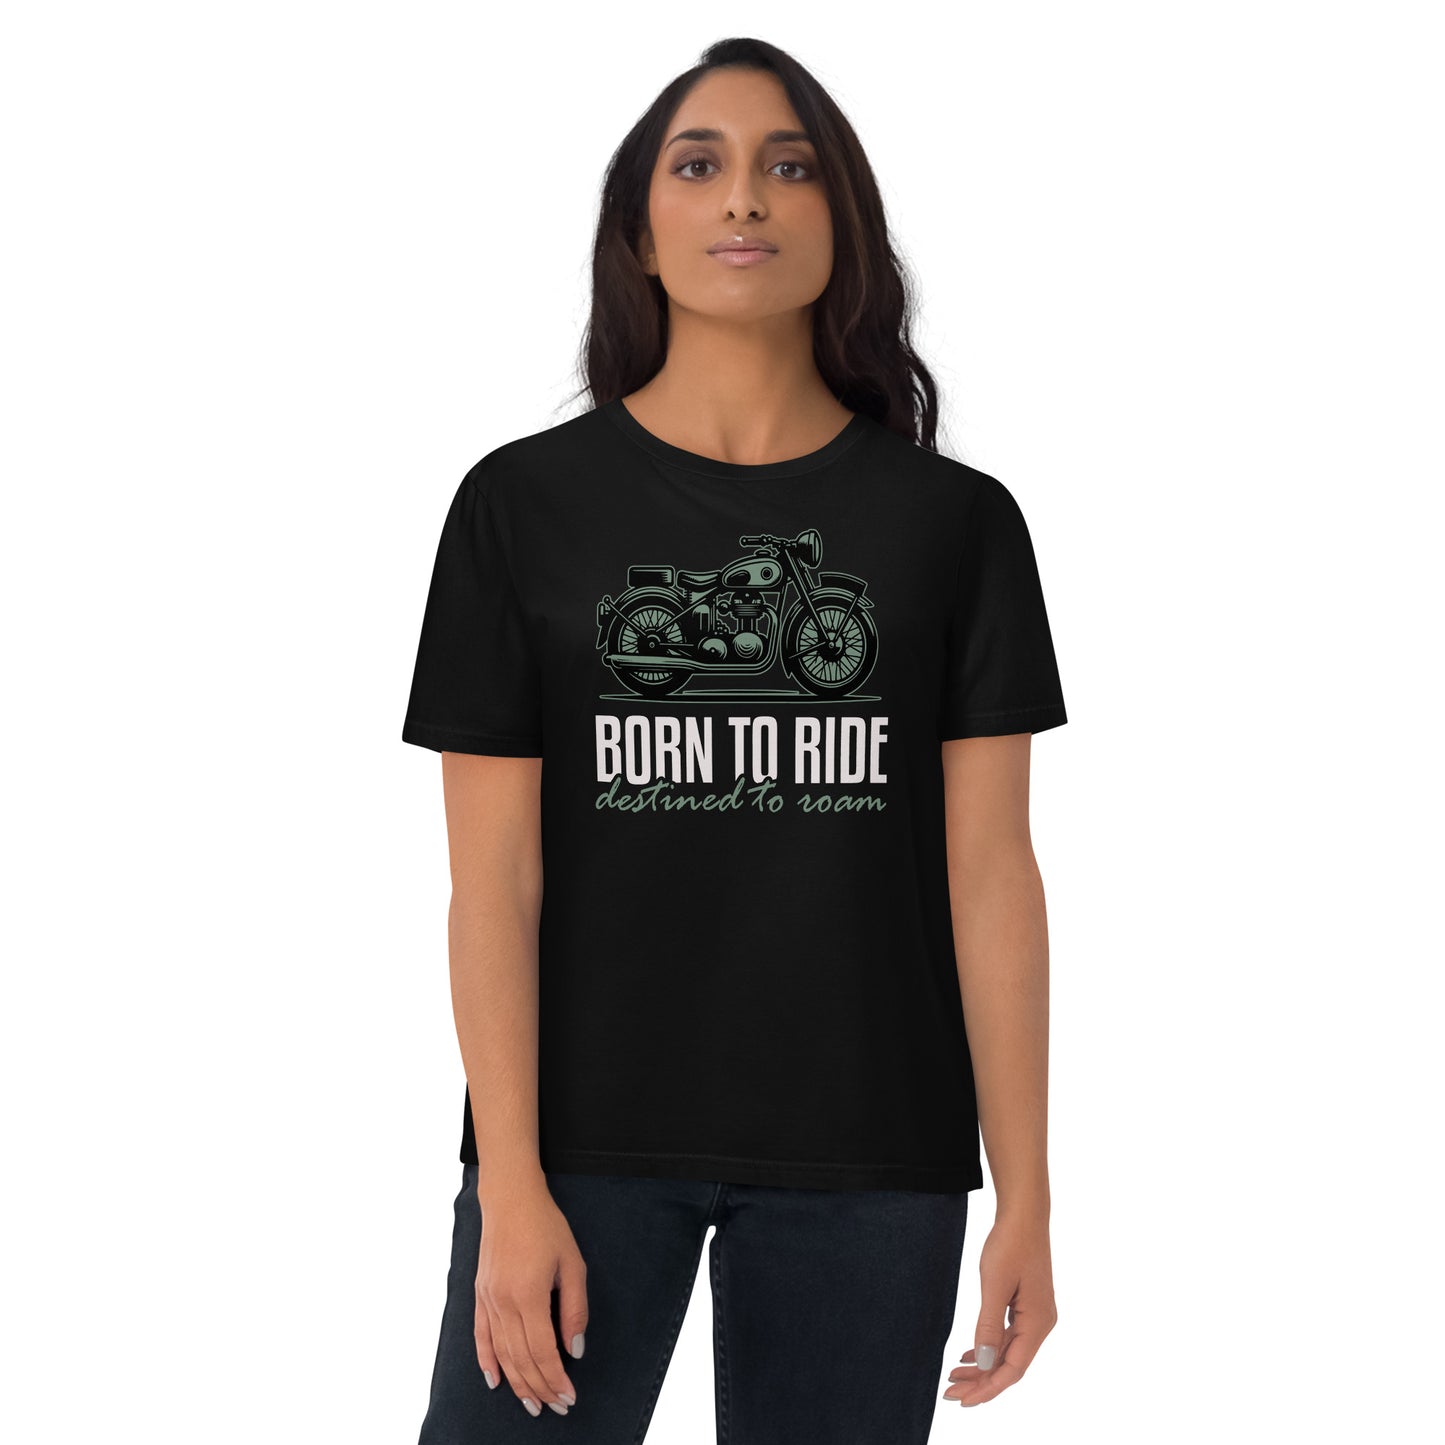 Born to Ride - Destined to Roam T-Shirt